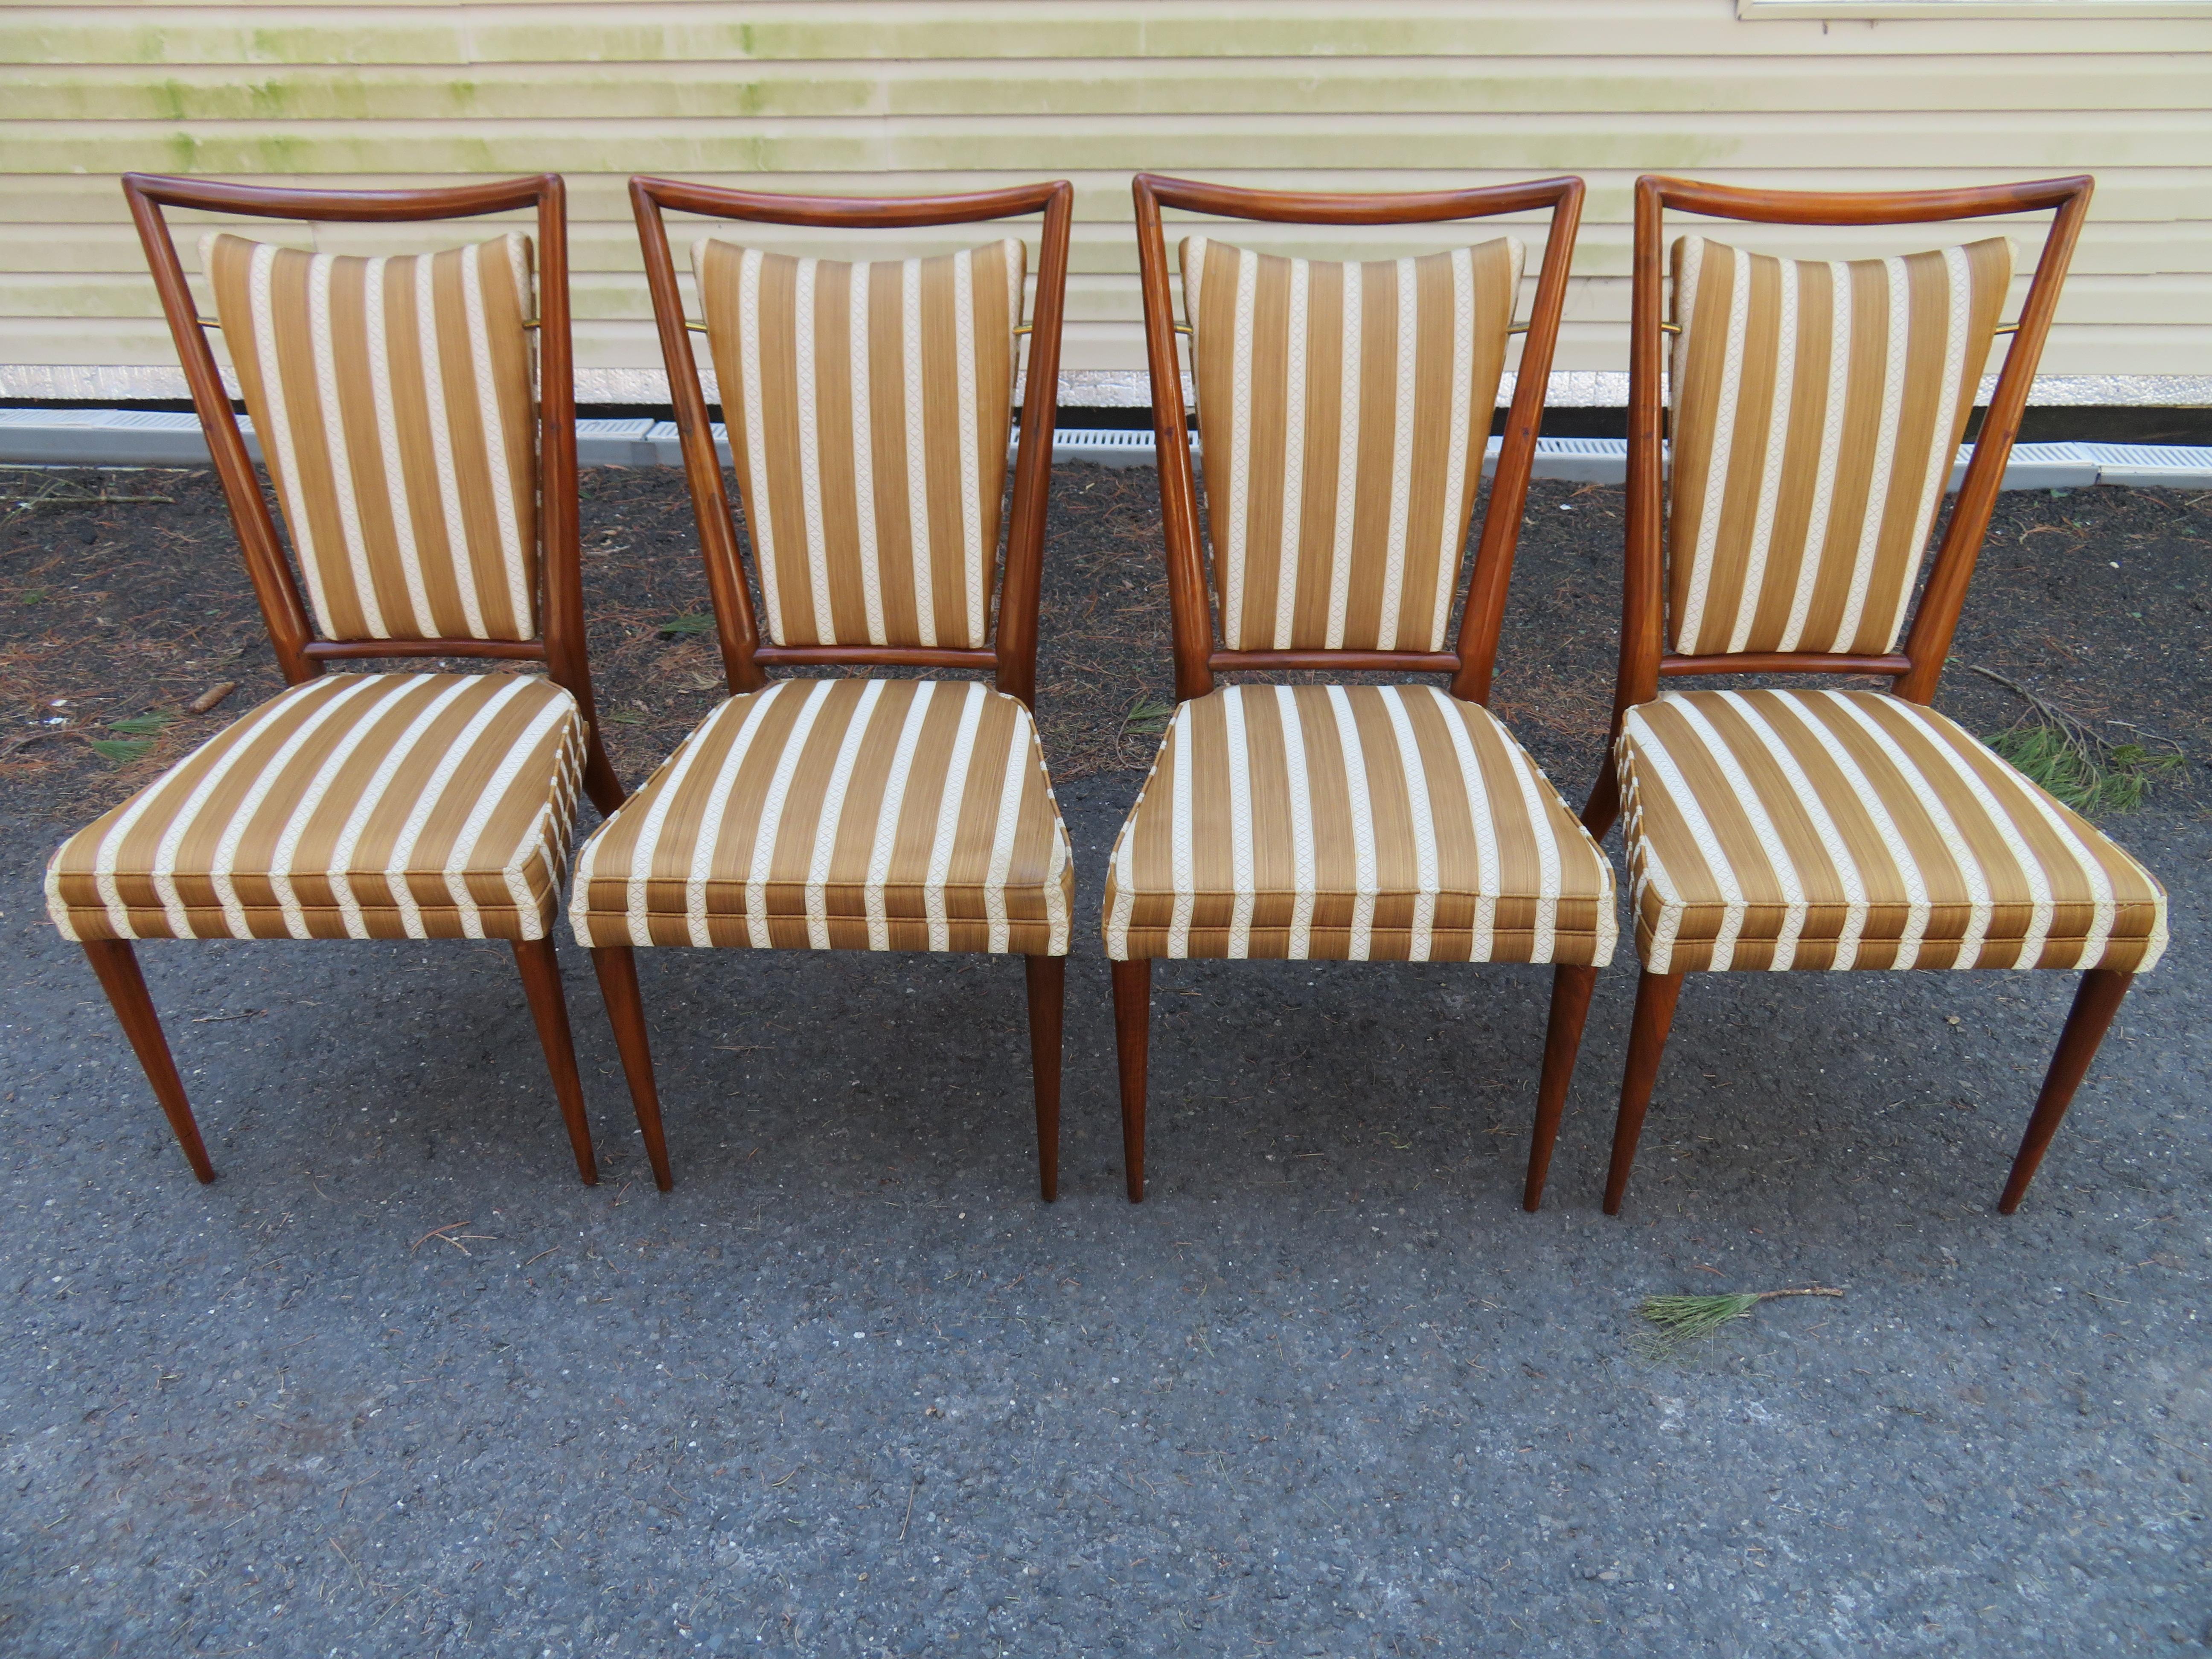 Set of six late 1950s Widdicomb modernist dining chairs in walnut with upholstered seat and floating back cushions held suspended by brass fittings. Designed by J. Stuart Clingman. The sinewy lines, tapered legs and floating back panel are similar